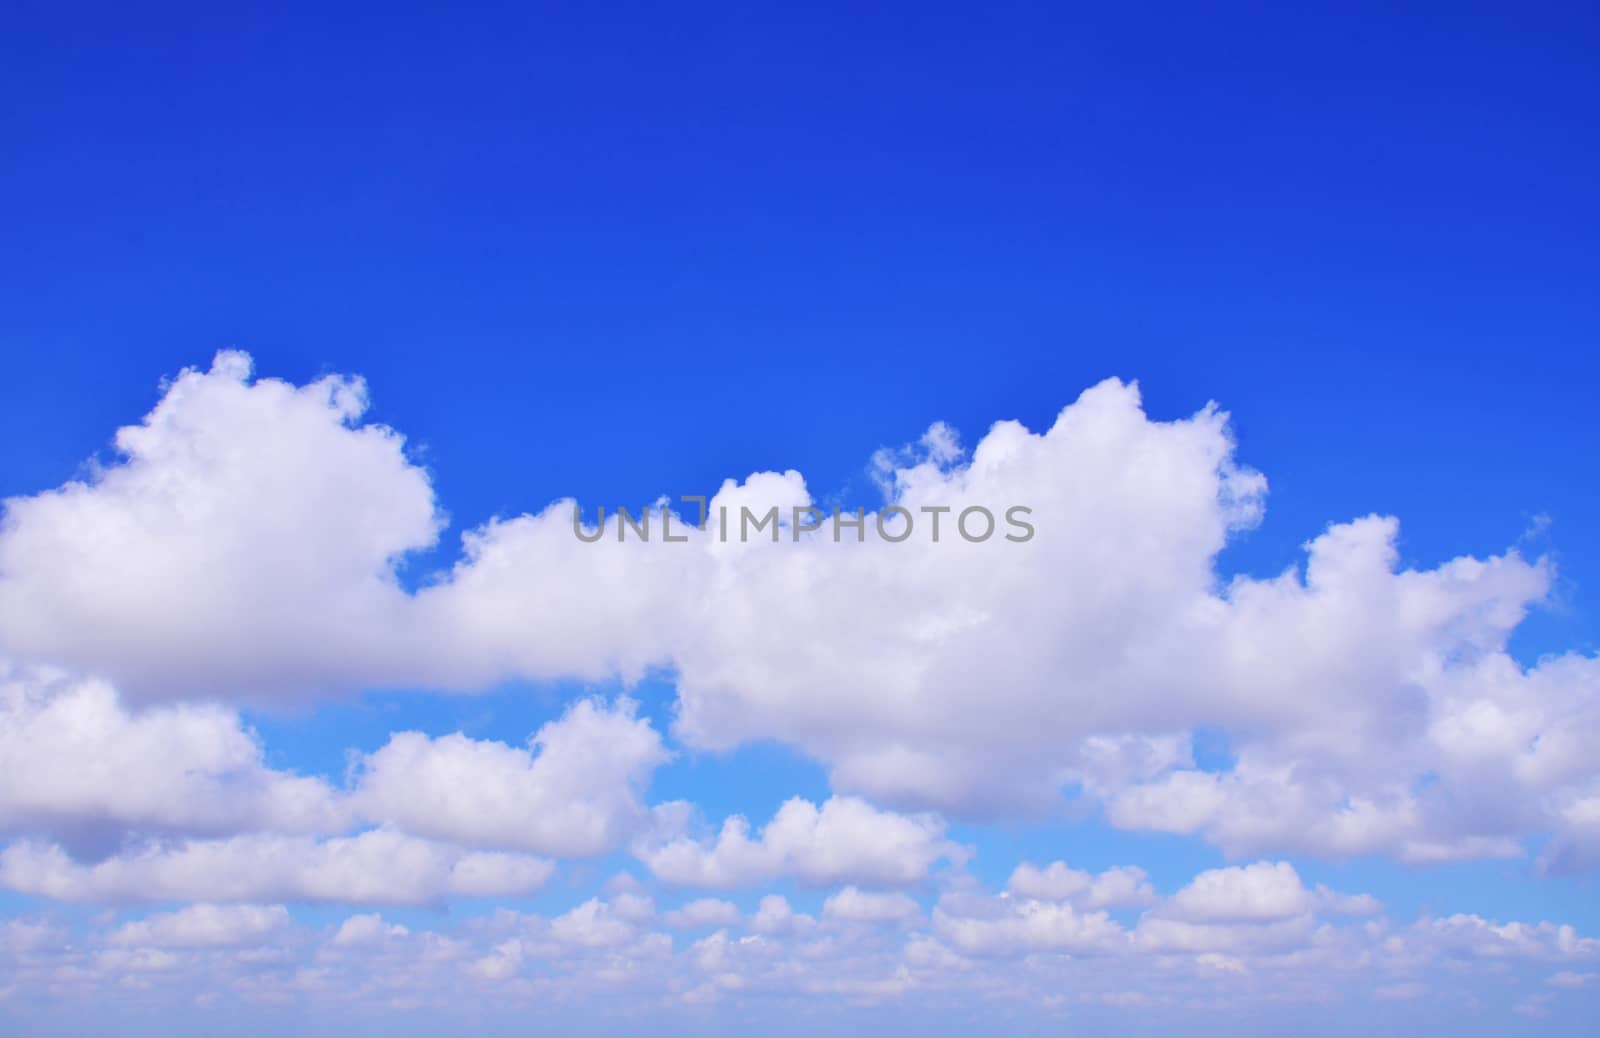 The vast blue sky clouds by phochi